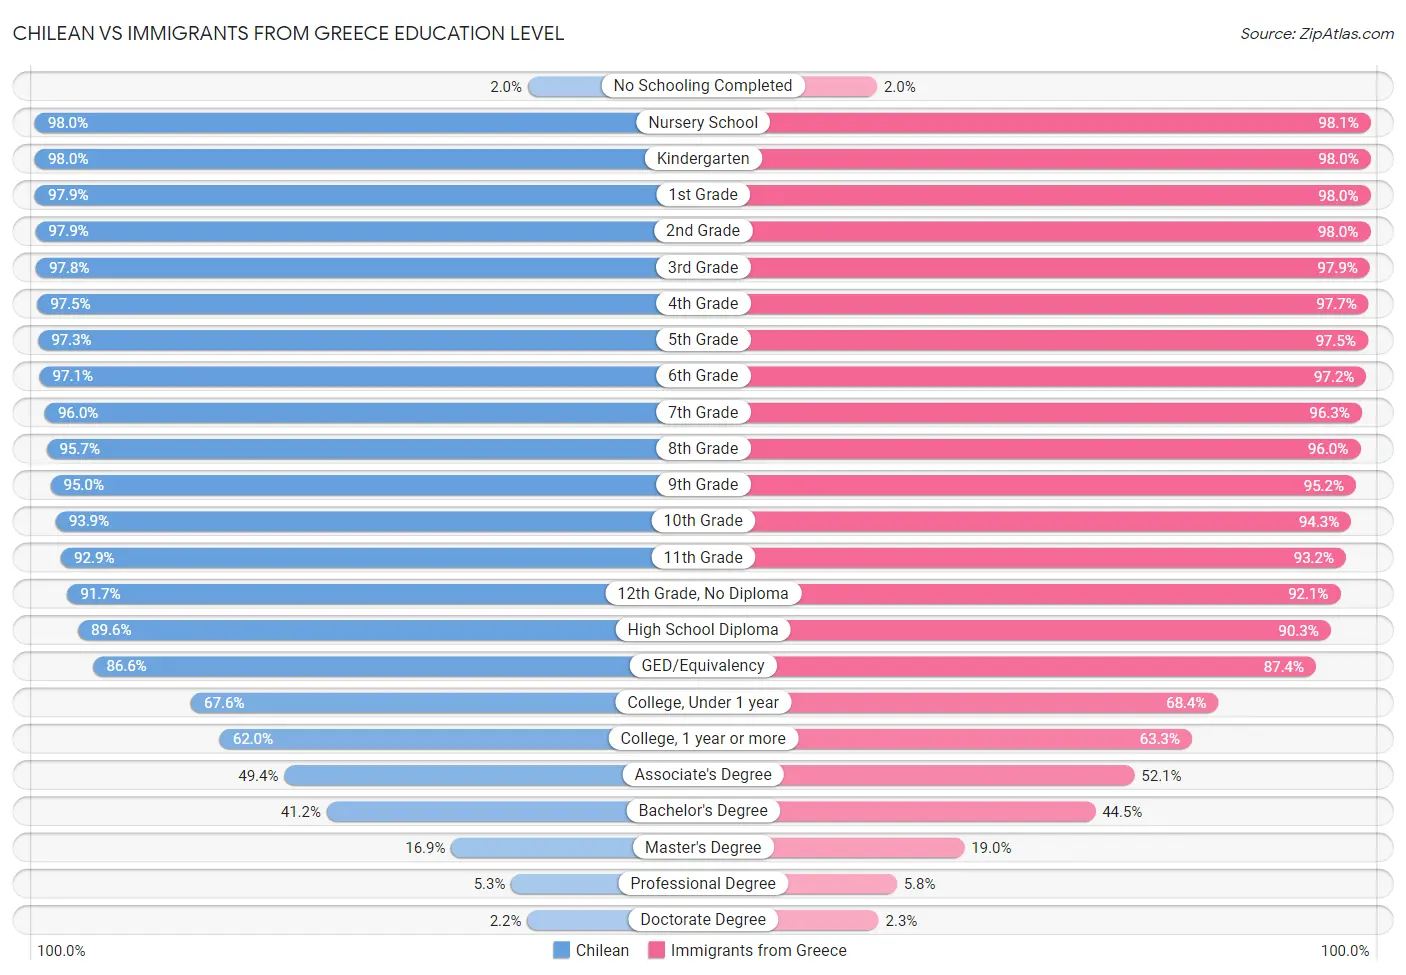 Chilean vs Immigrants from Greece Education Level